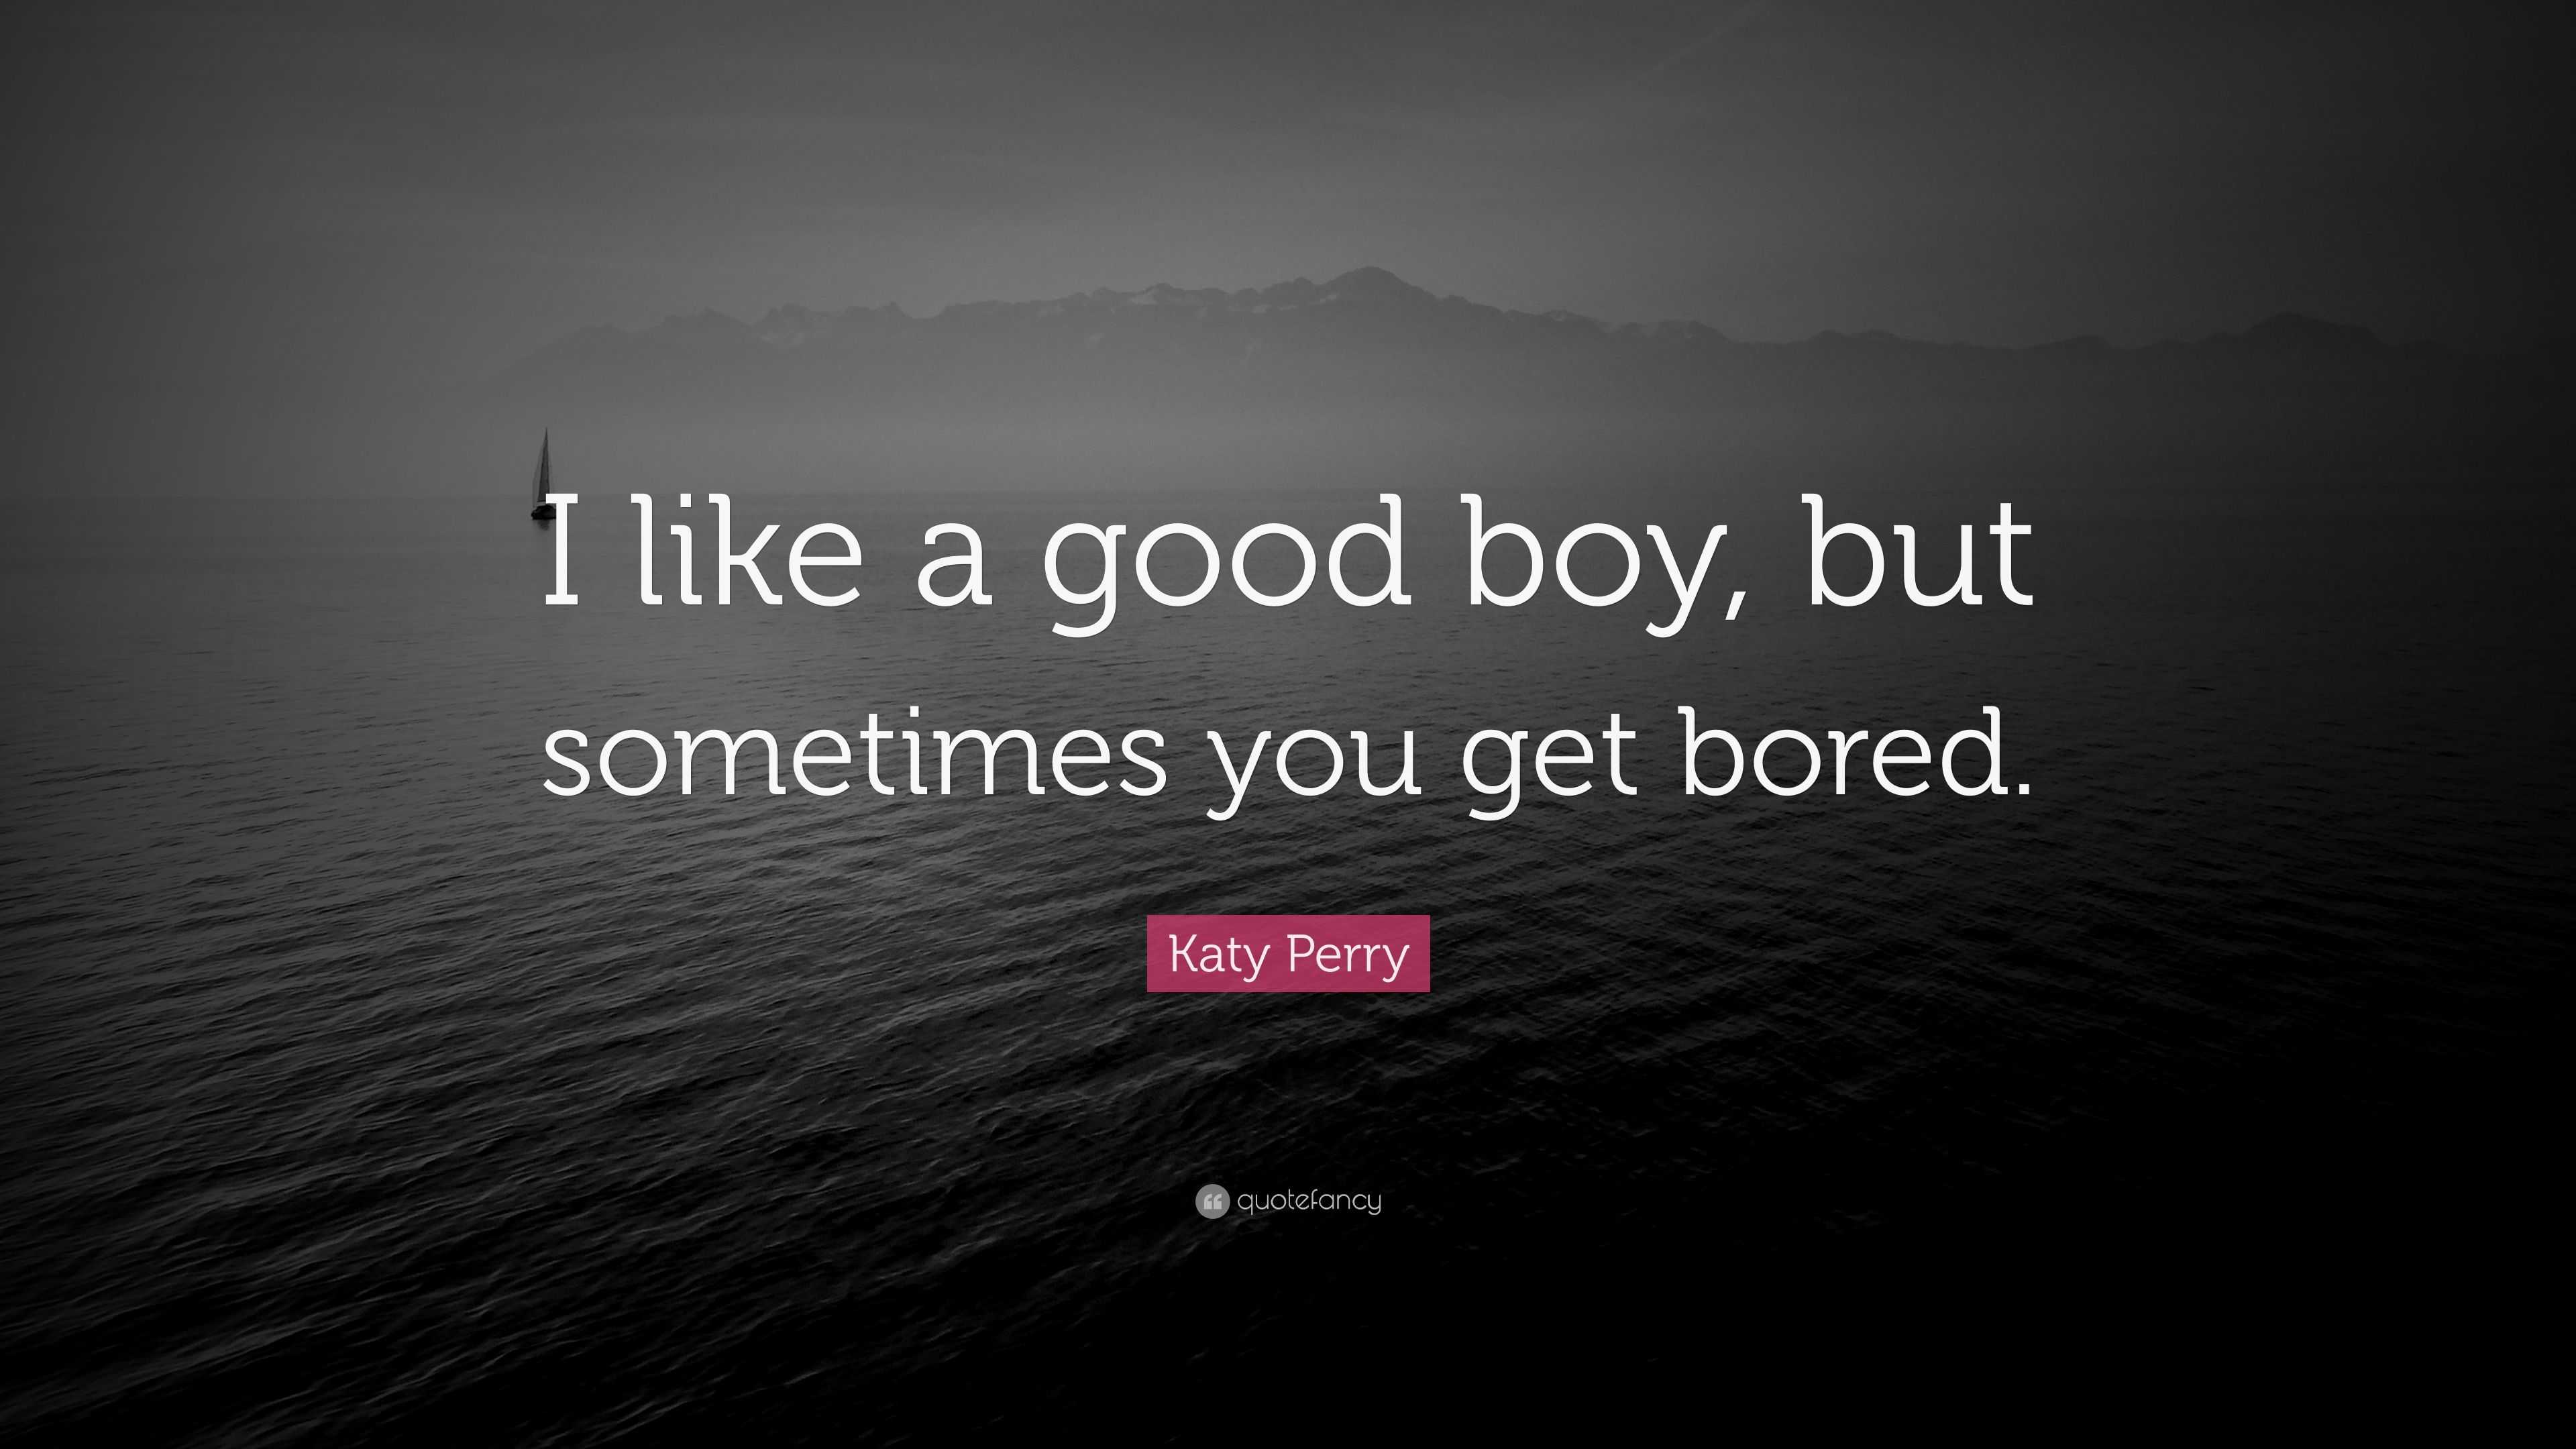 Katy Perry Quote: “I like a good boy, but sometimes you get bored.”